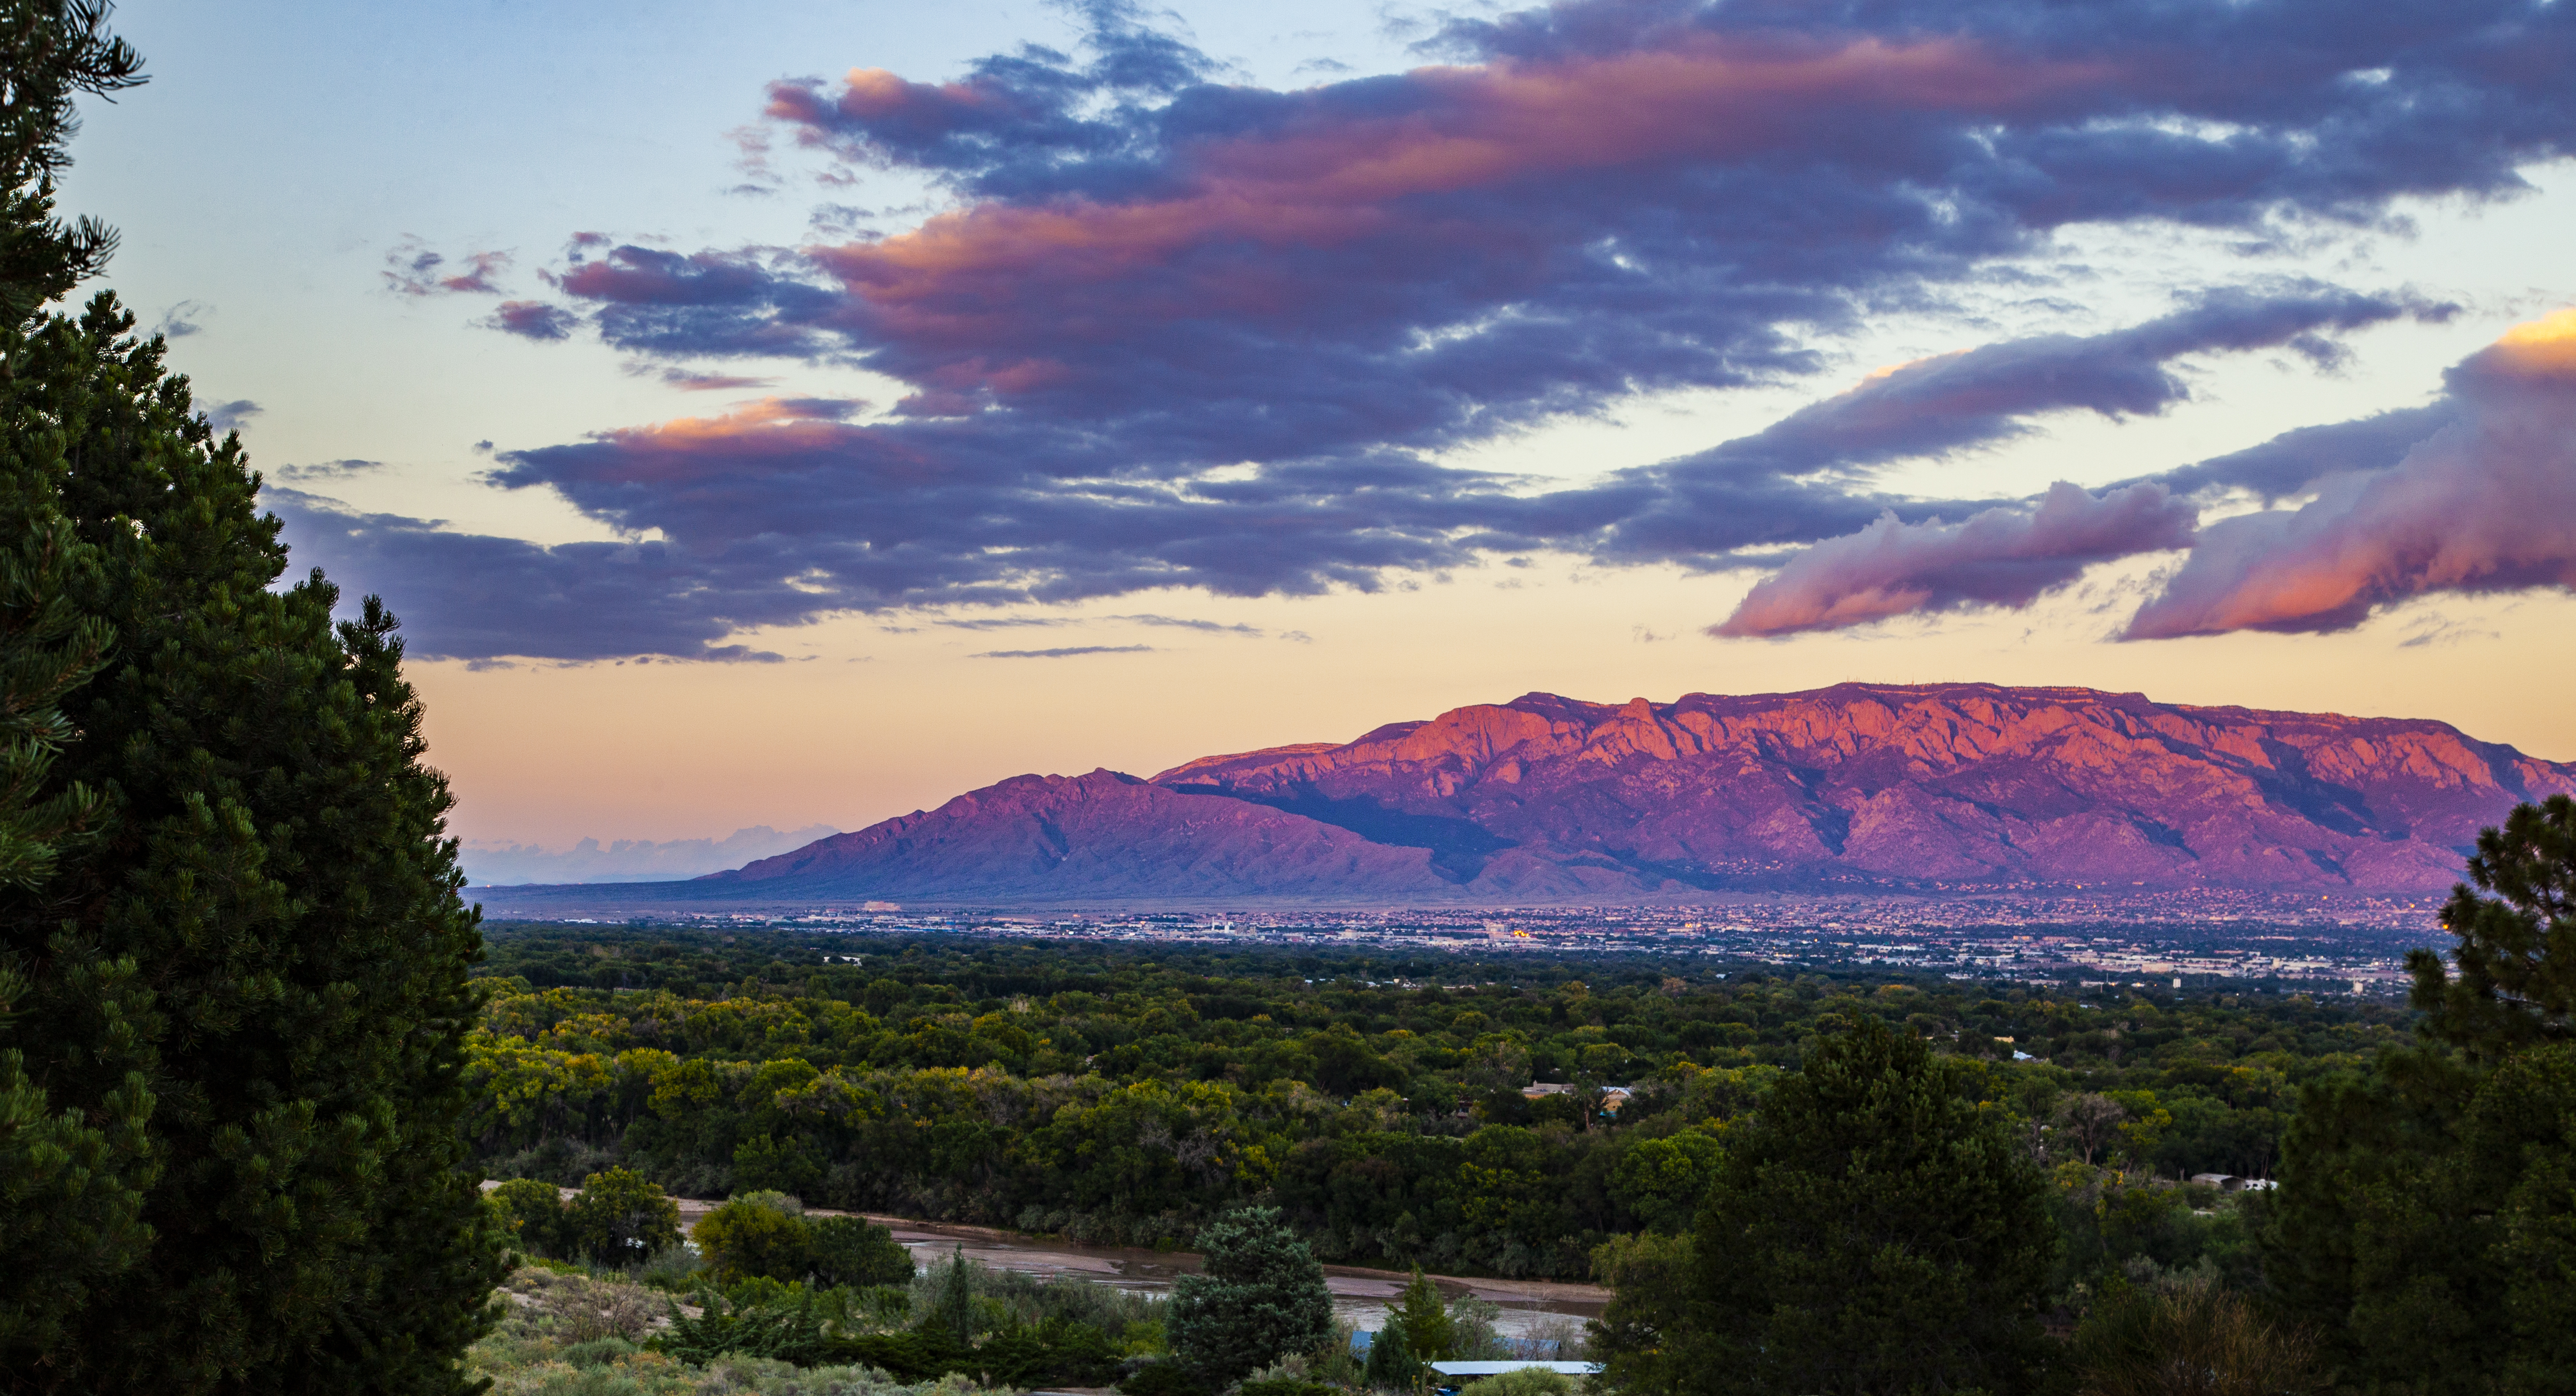 The Sandia Mountains at sunset from the westside of the city.